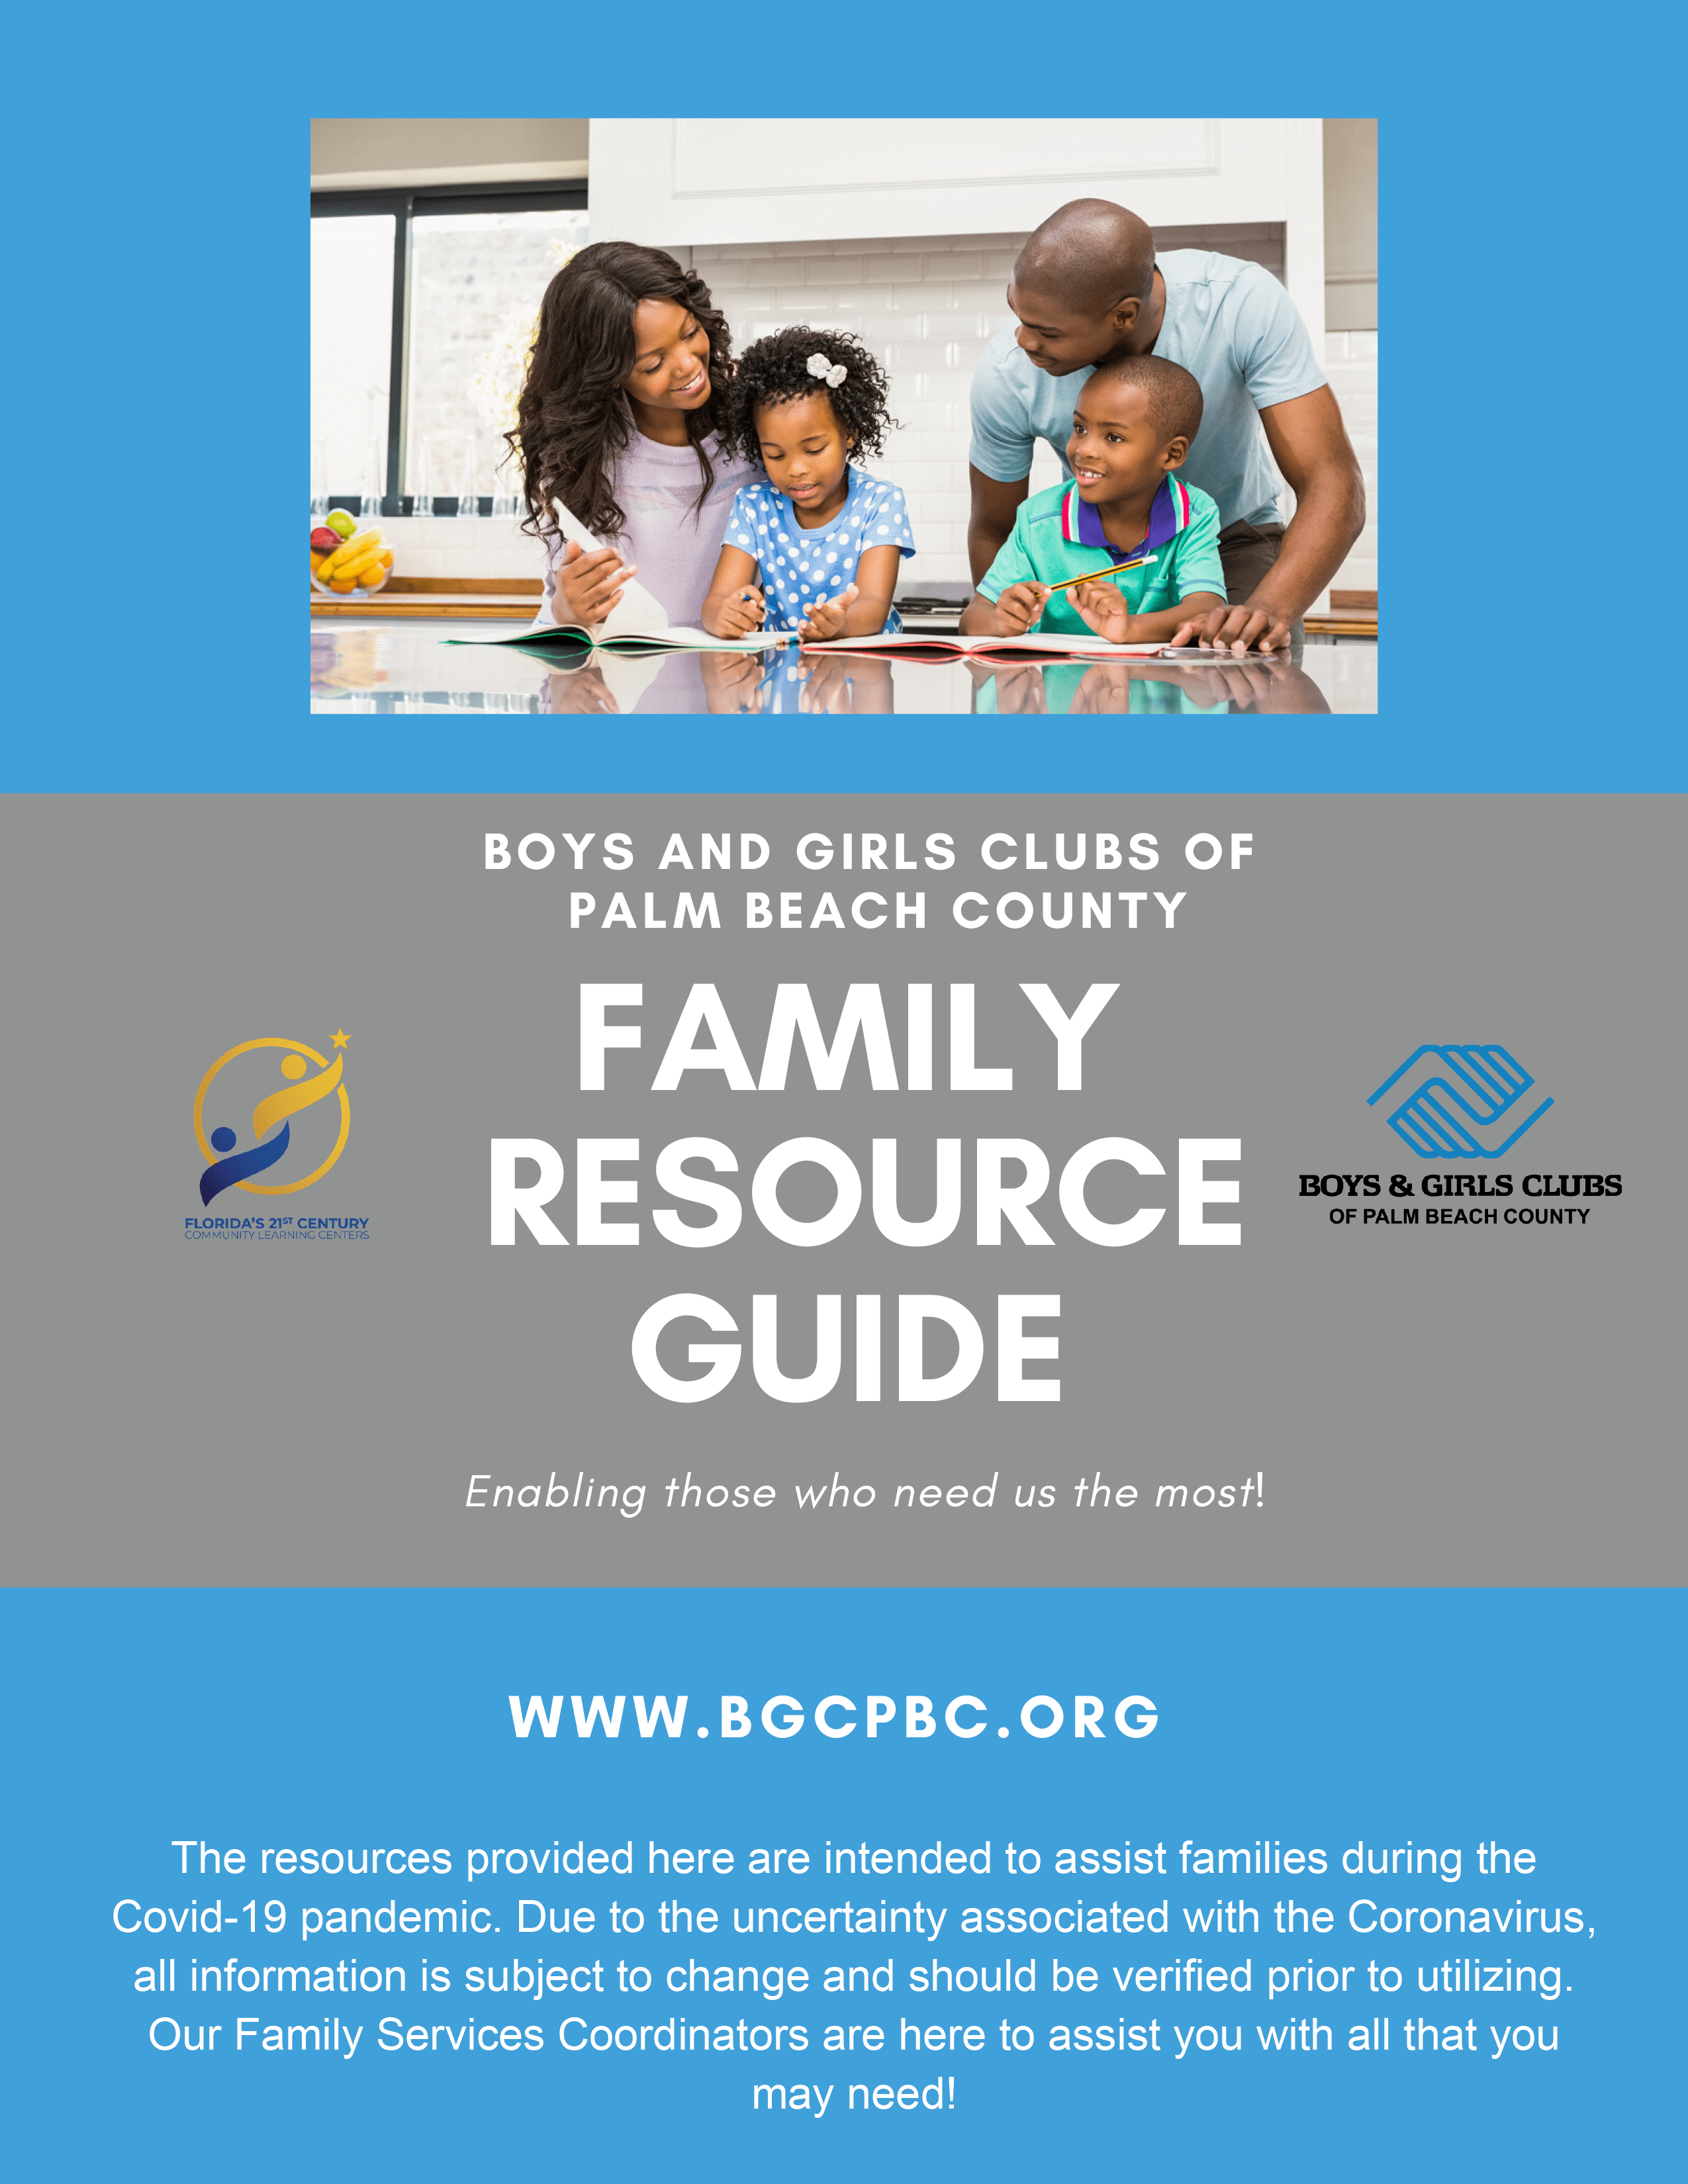 bgcpbc-family-resource-guide-final-1